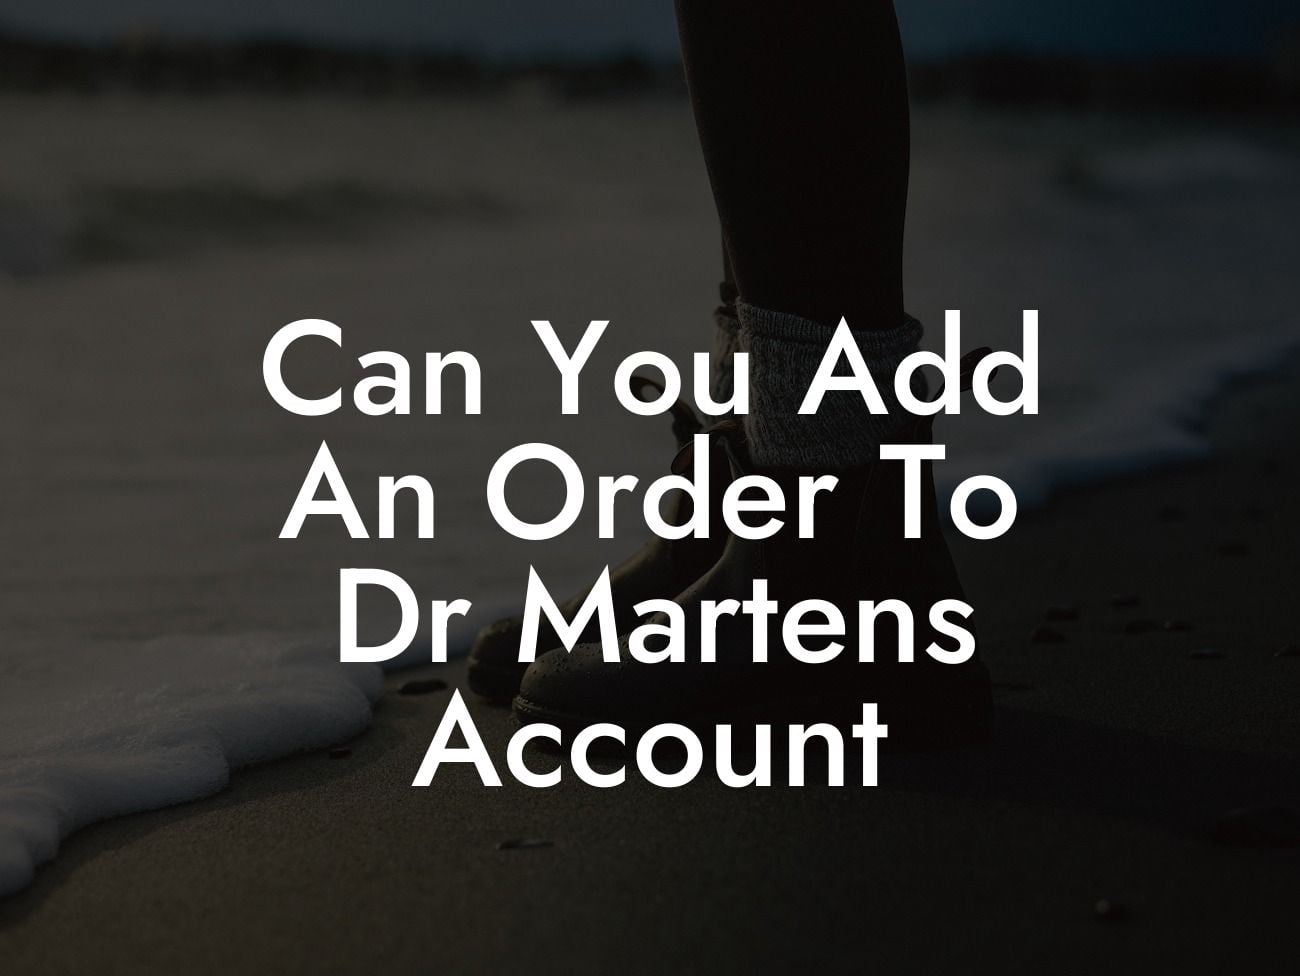 Can You Add An Order To Dr Martens Account